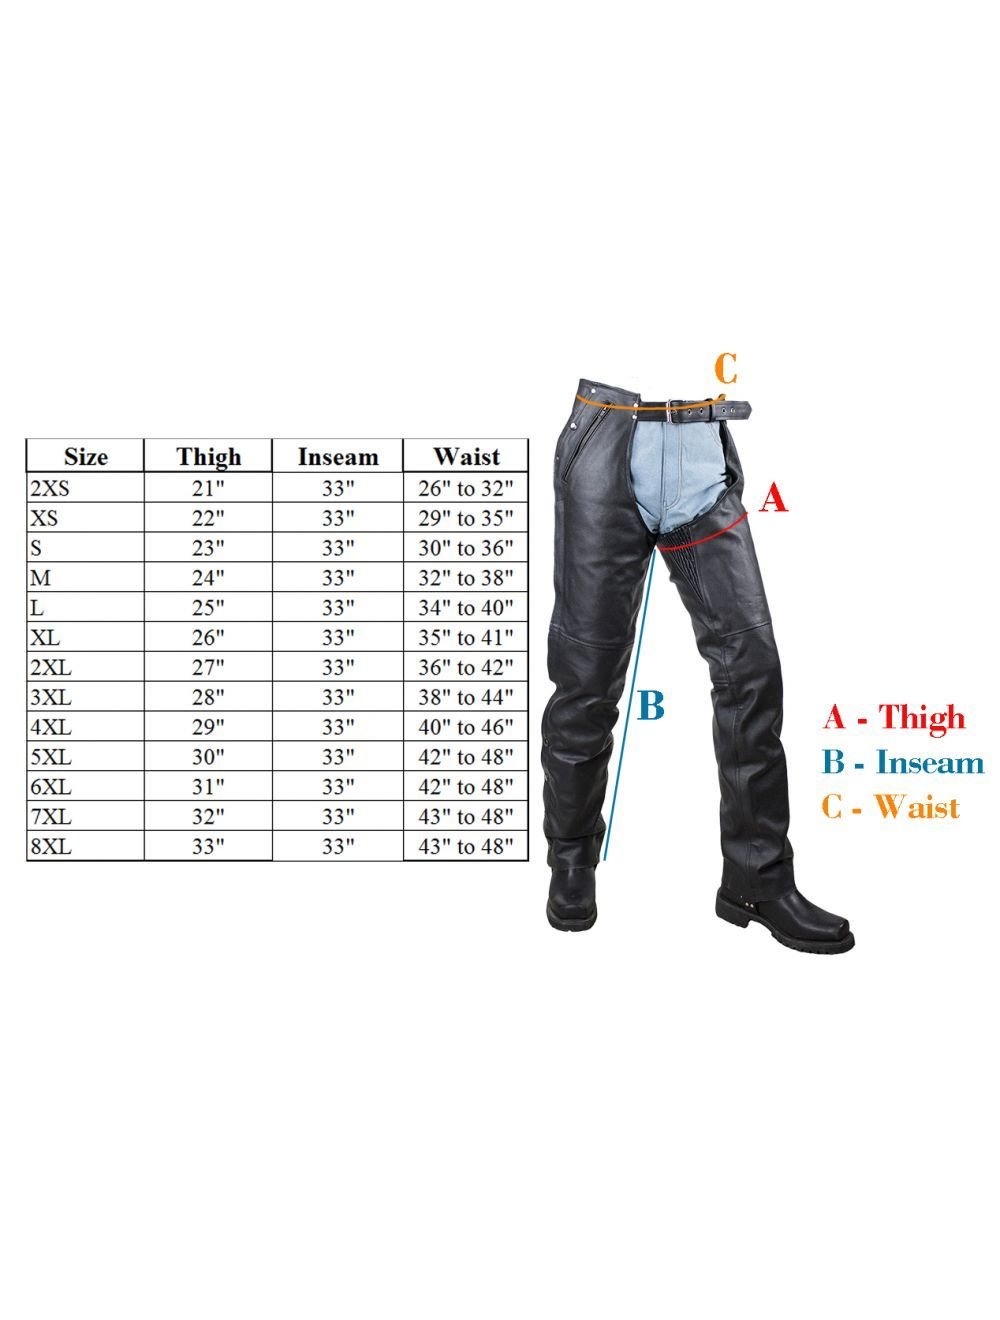 Size chart for women's leather chaps.